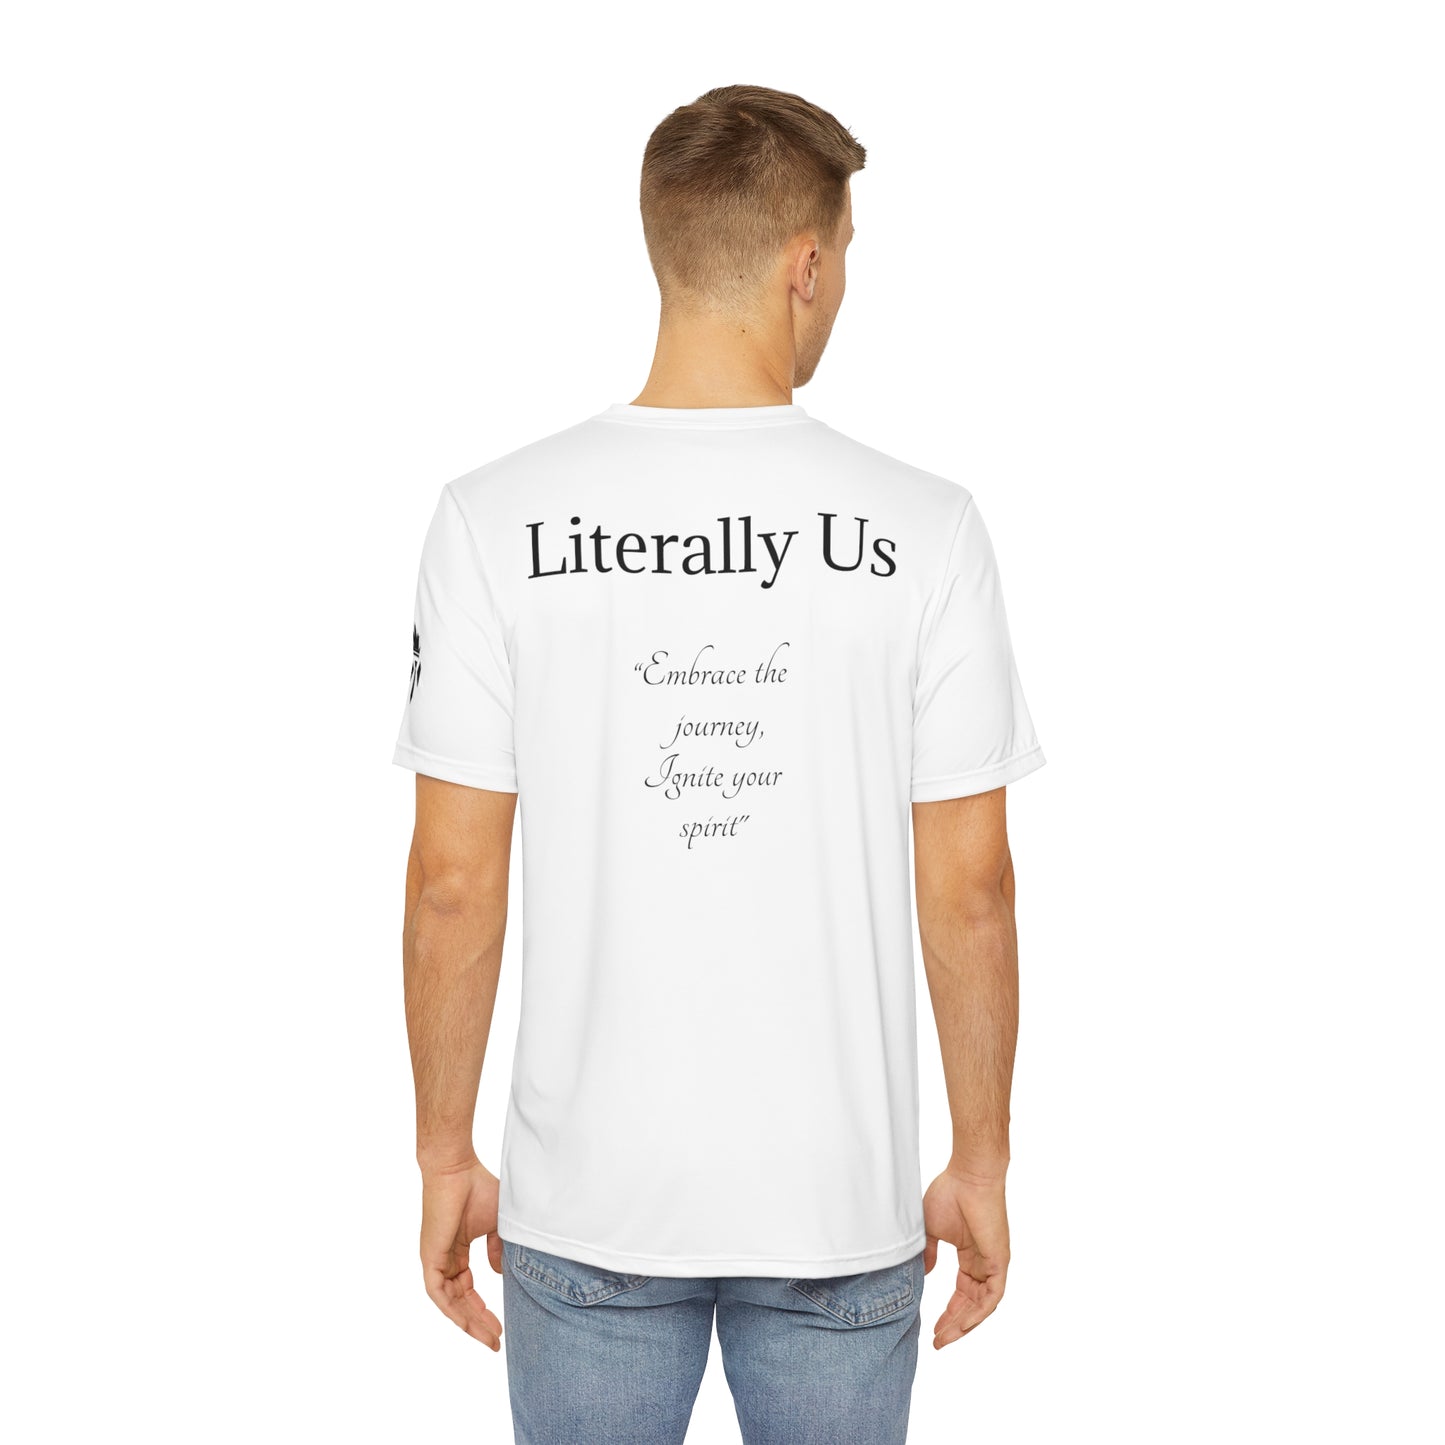 Monster Lisa Literally Us Quote T-shirt